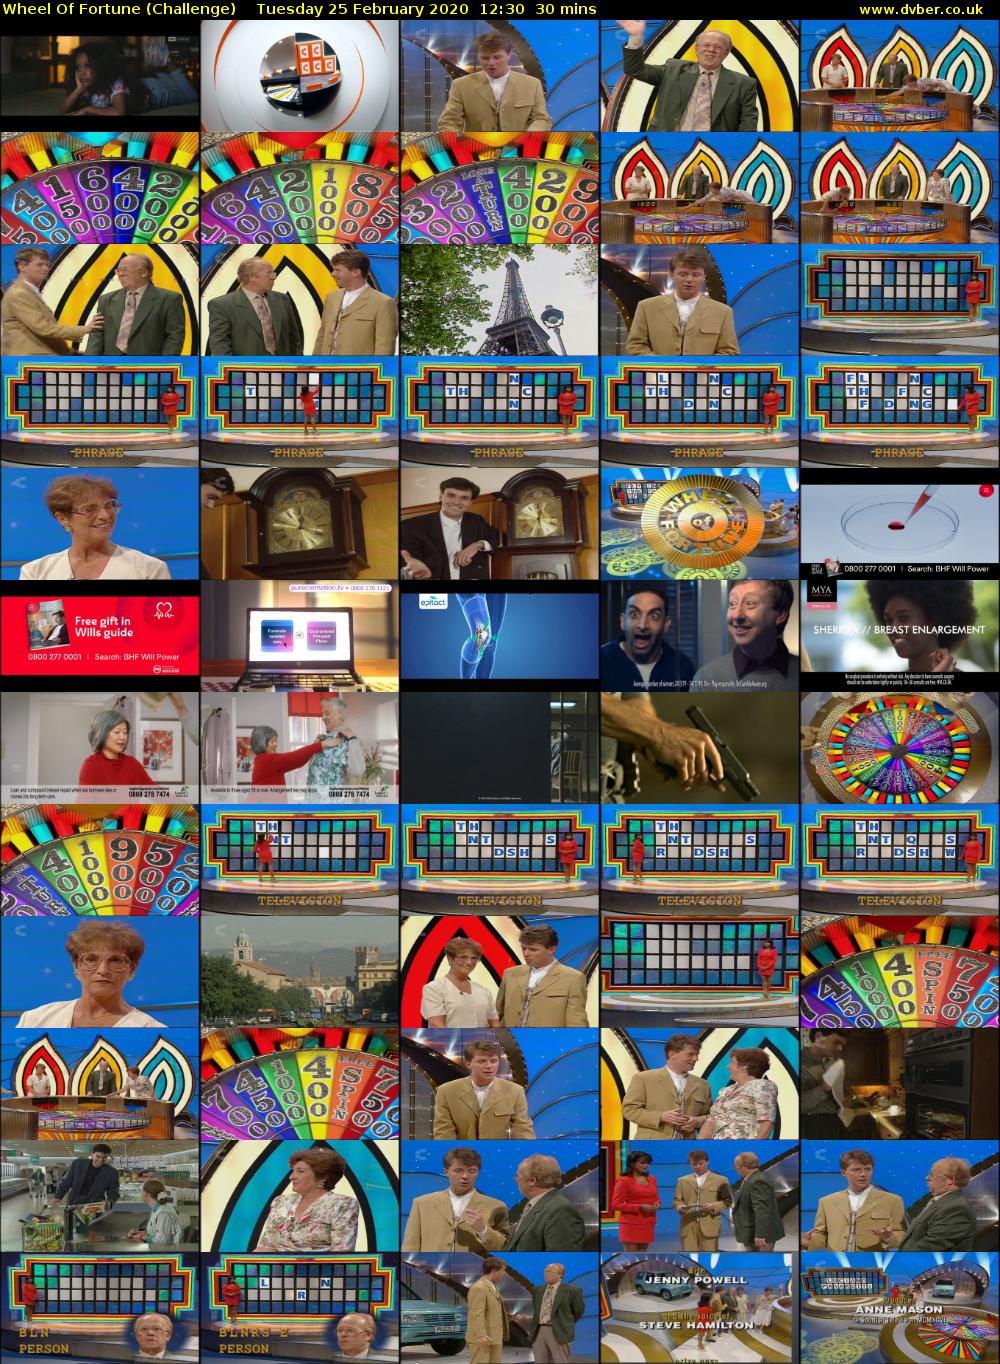 Wheel Of Fortune (Challenge) Tuesday 25 February 2020 12:30 - 13:00